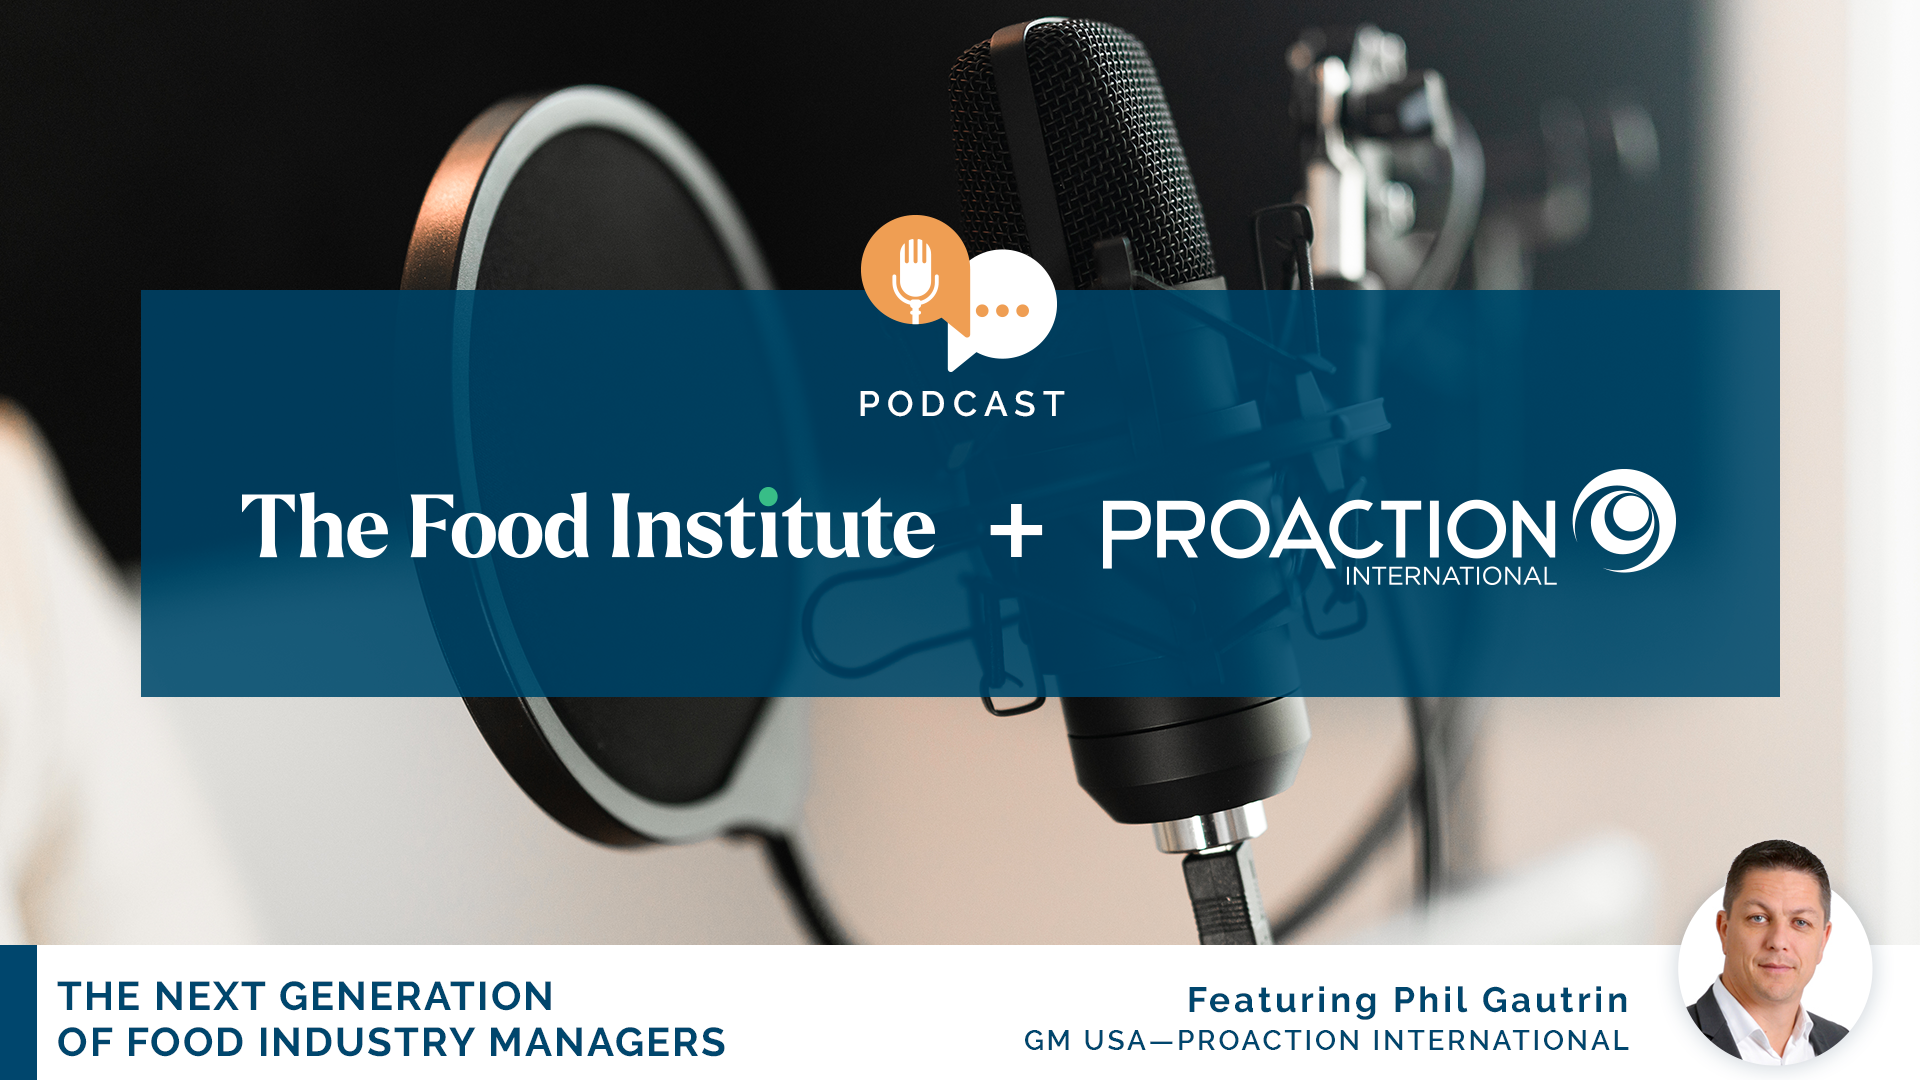 The Food Institute + Proaction International